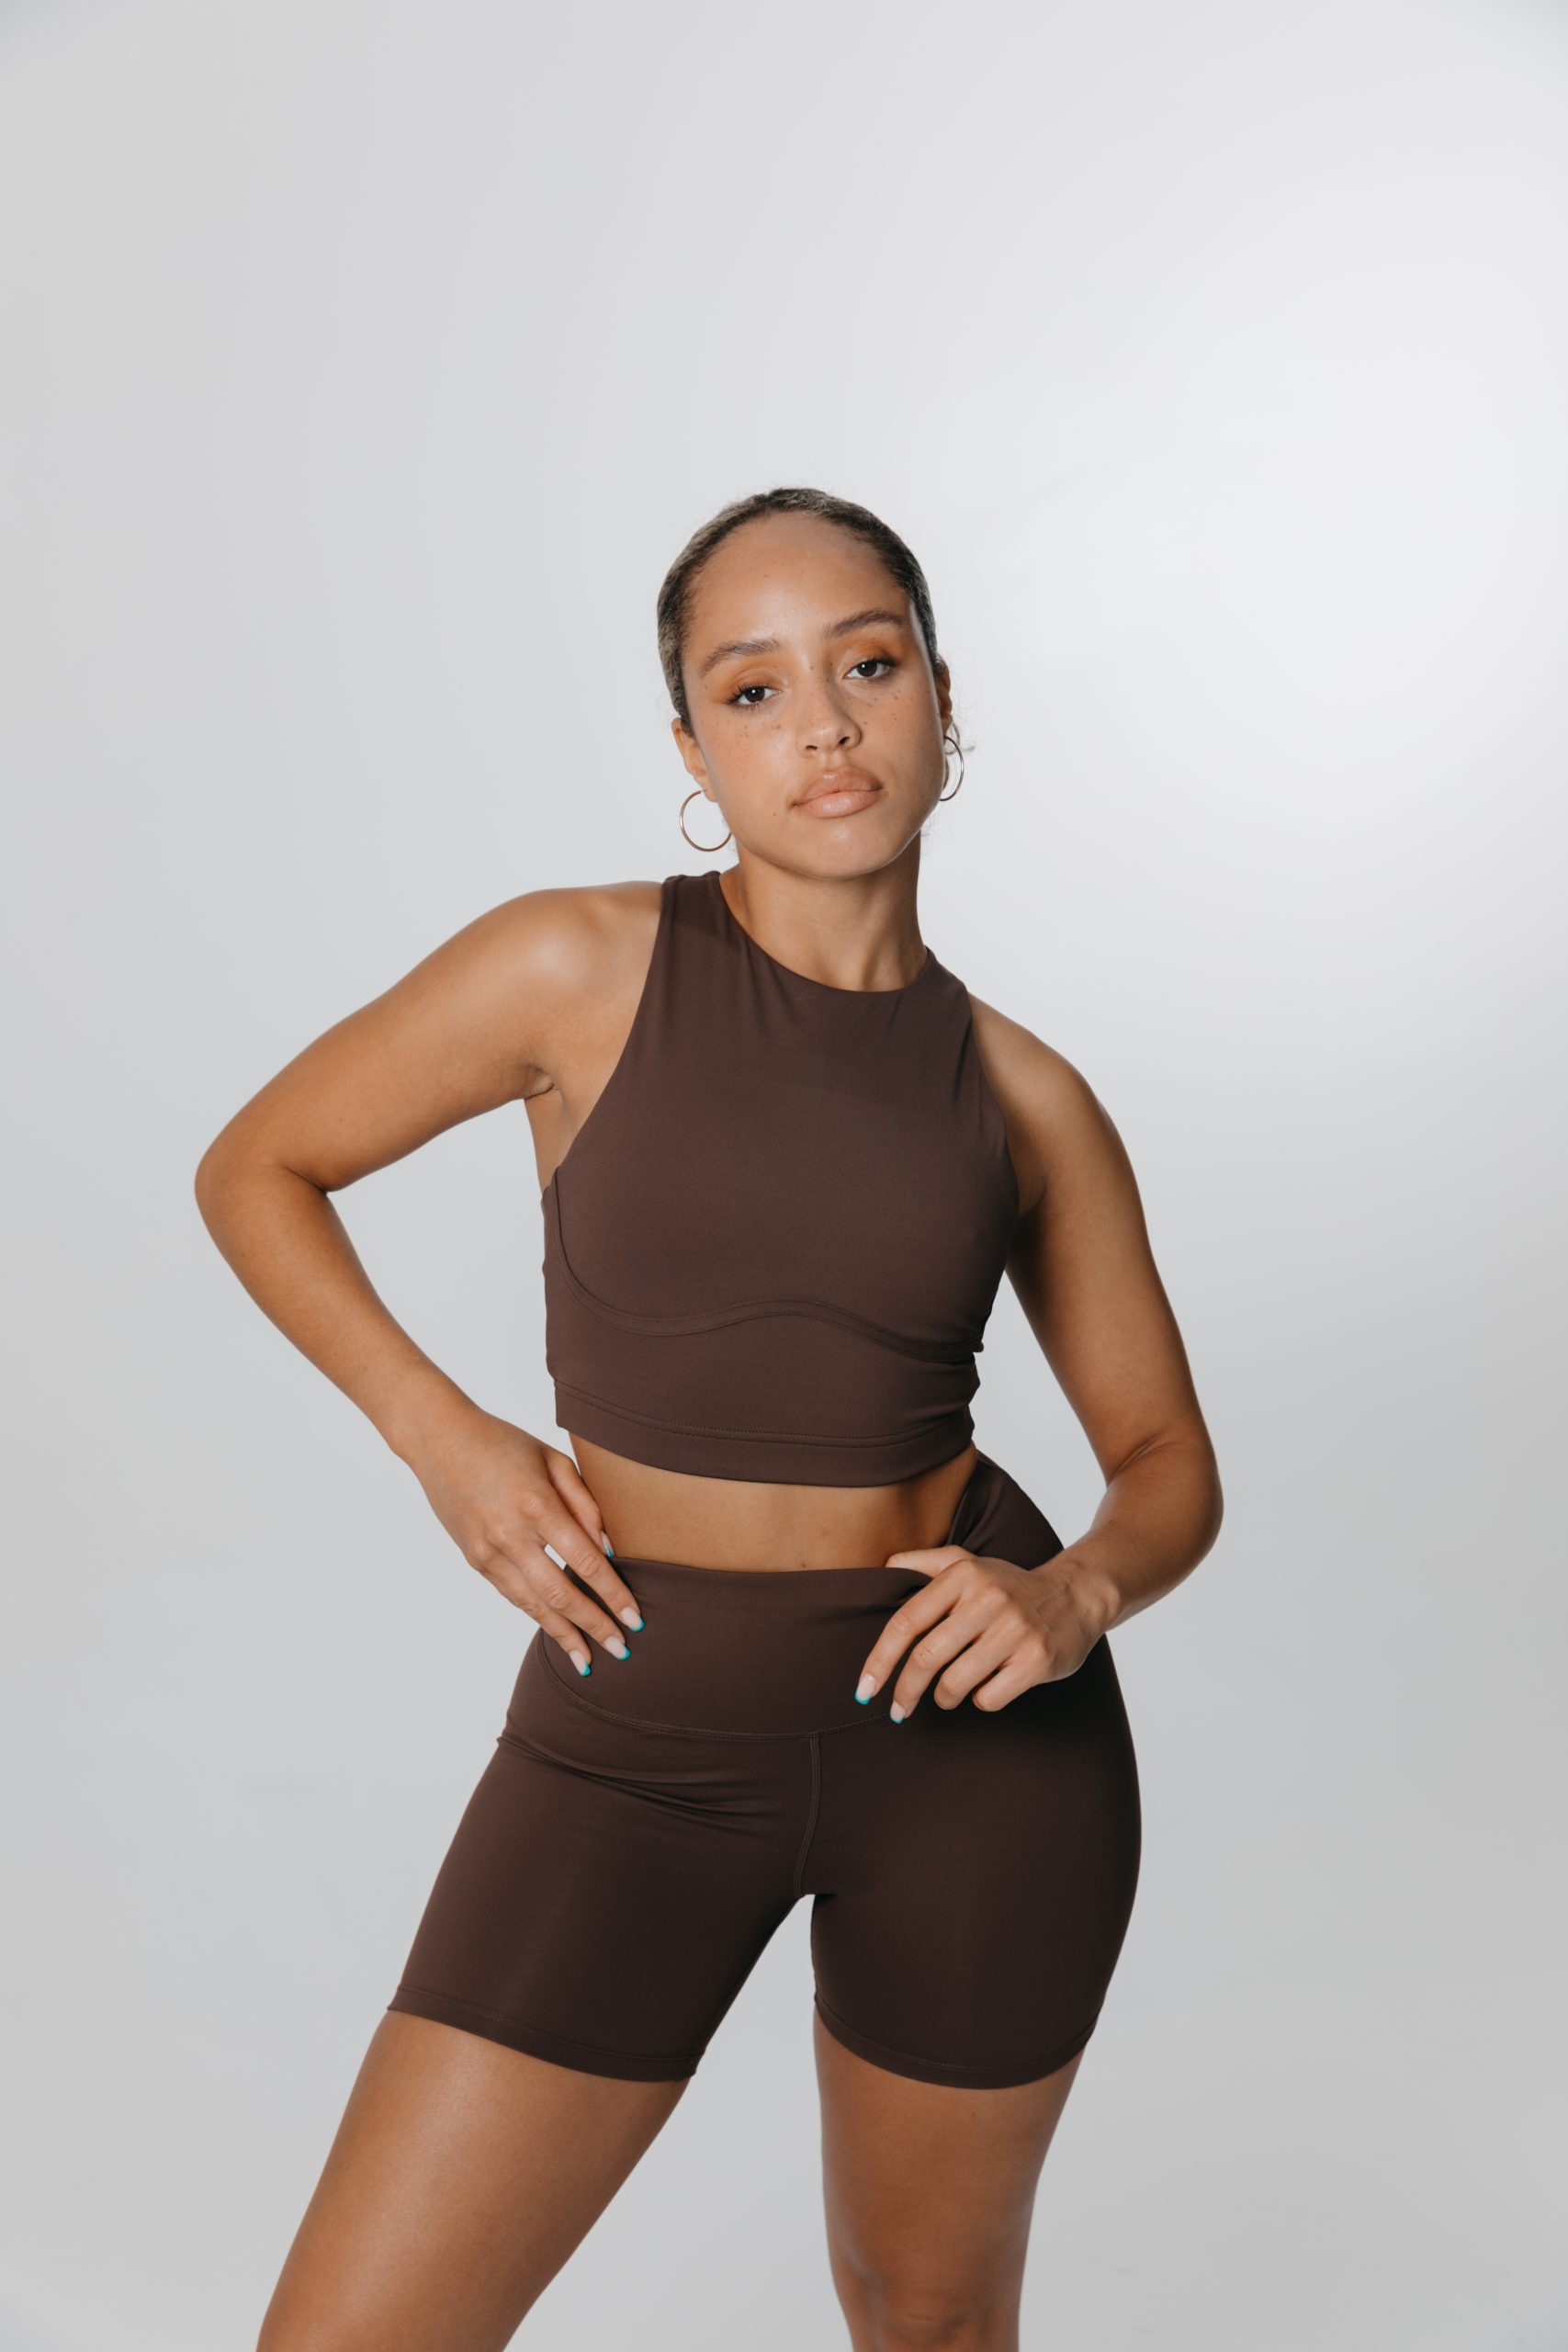 A woman modelling a brown outfit from TALA's activewear collection